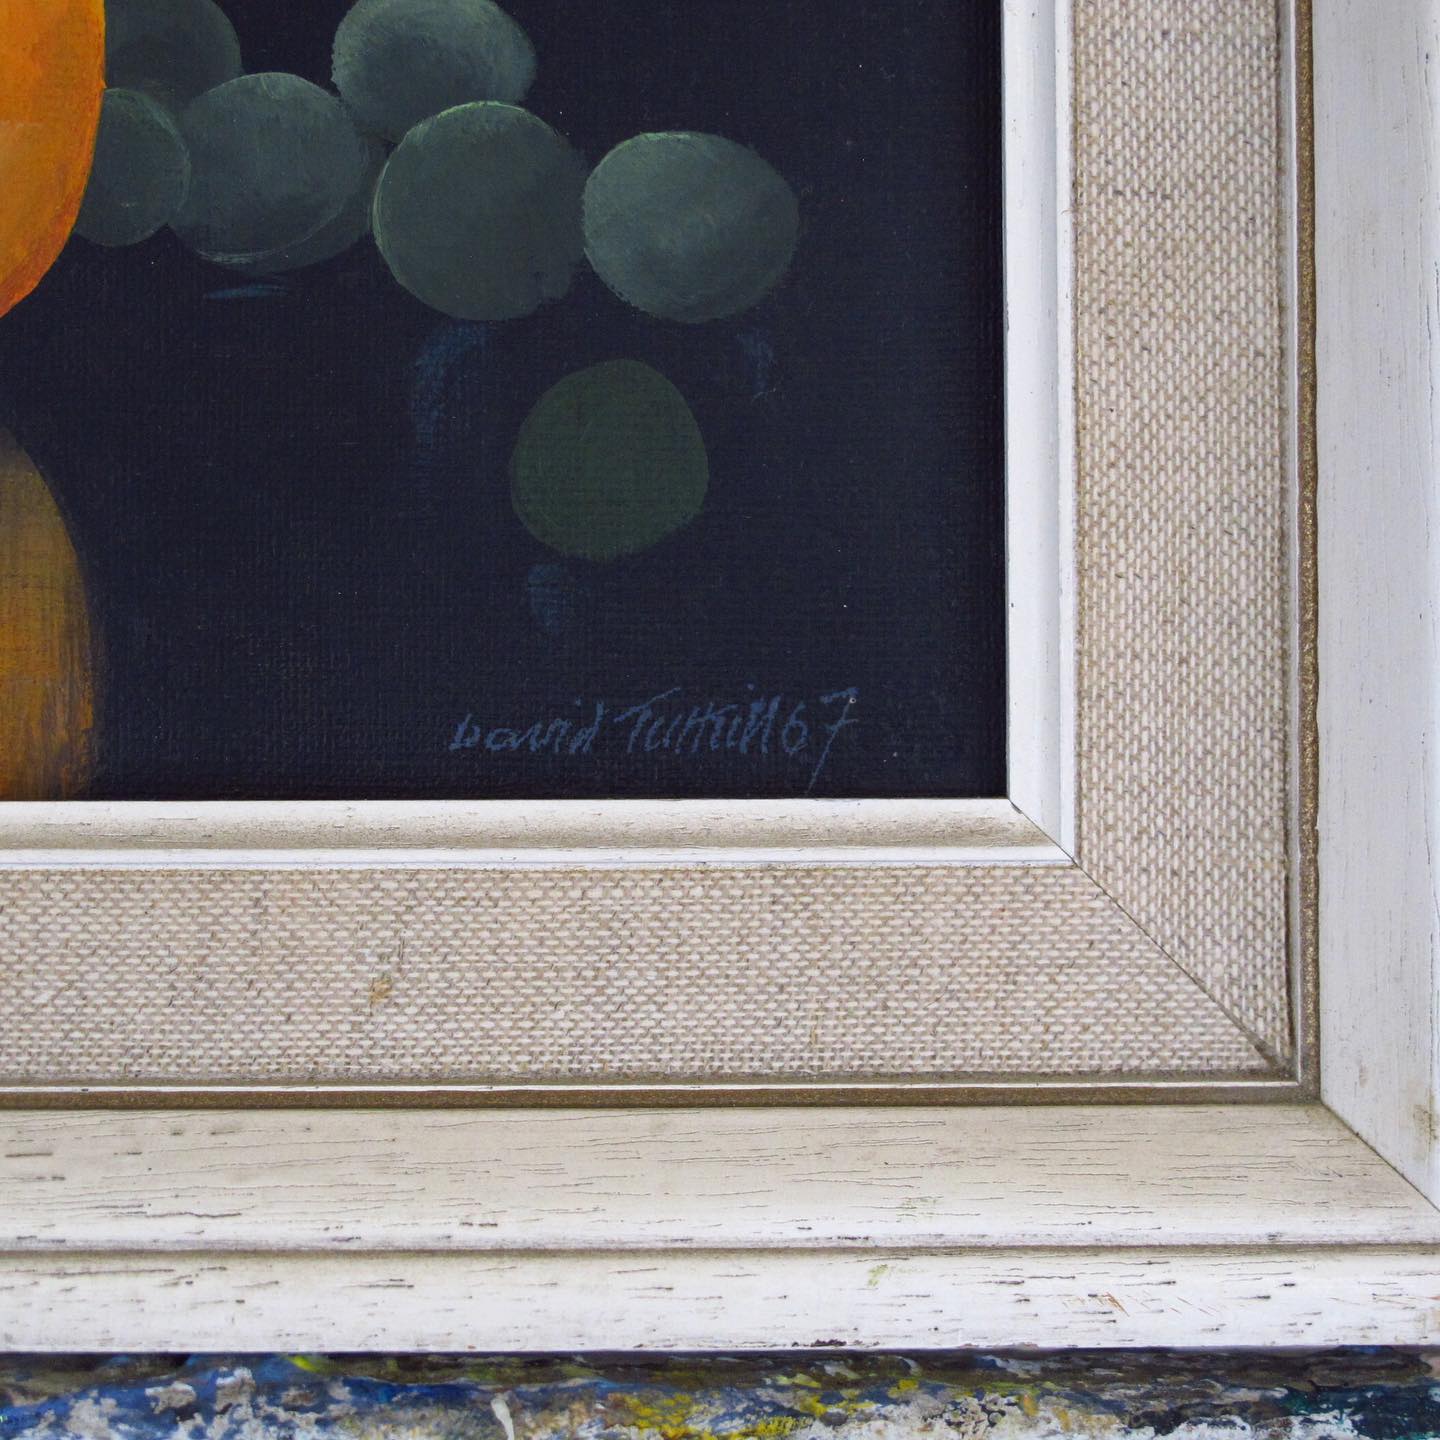 David Turkill Signed Still Life of Oranges, Grapes, Wine Glass, dated 1967 from the Sidwell Art Show, England